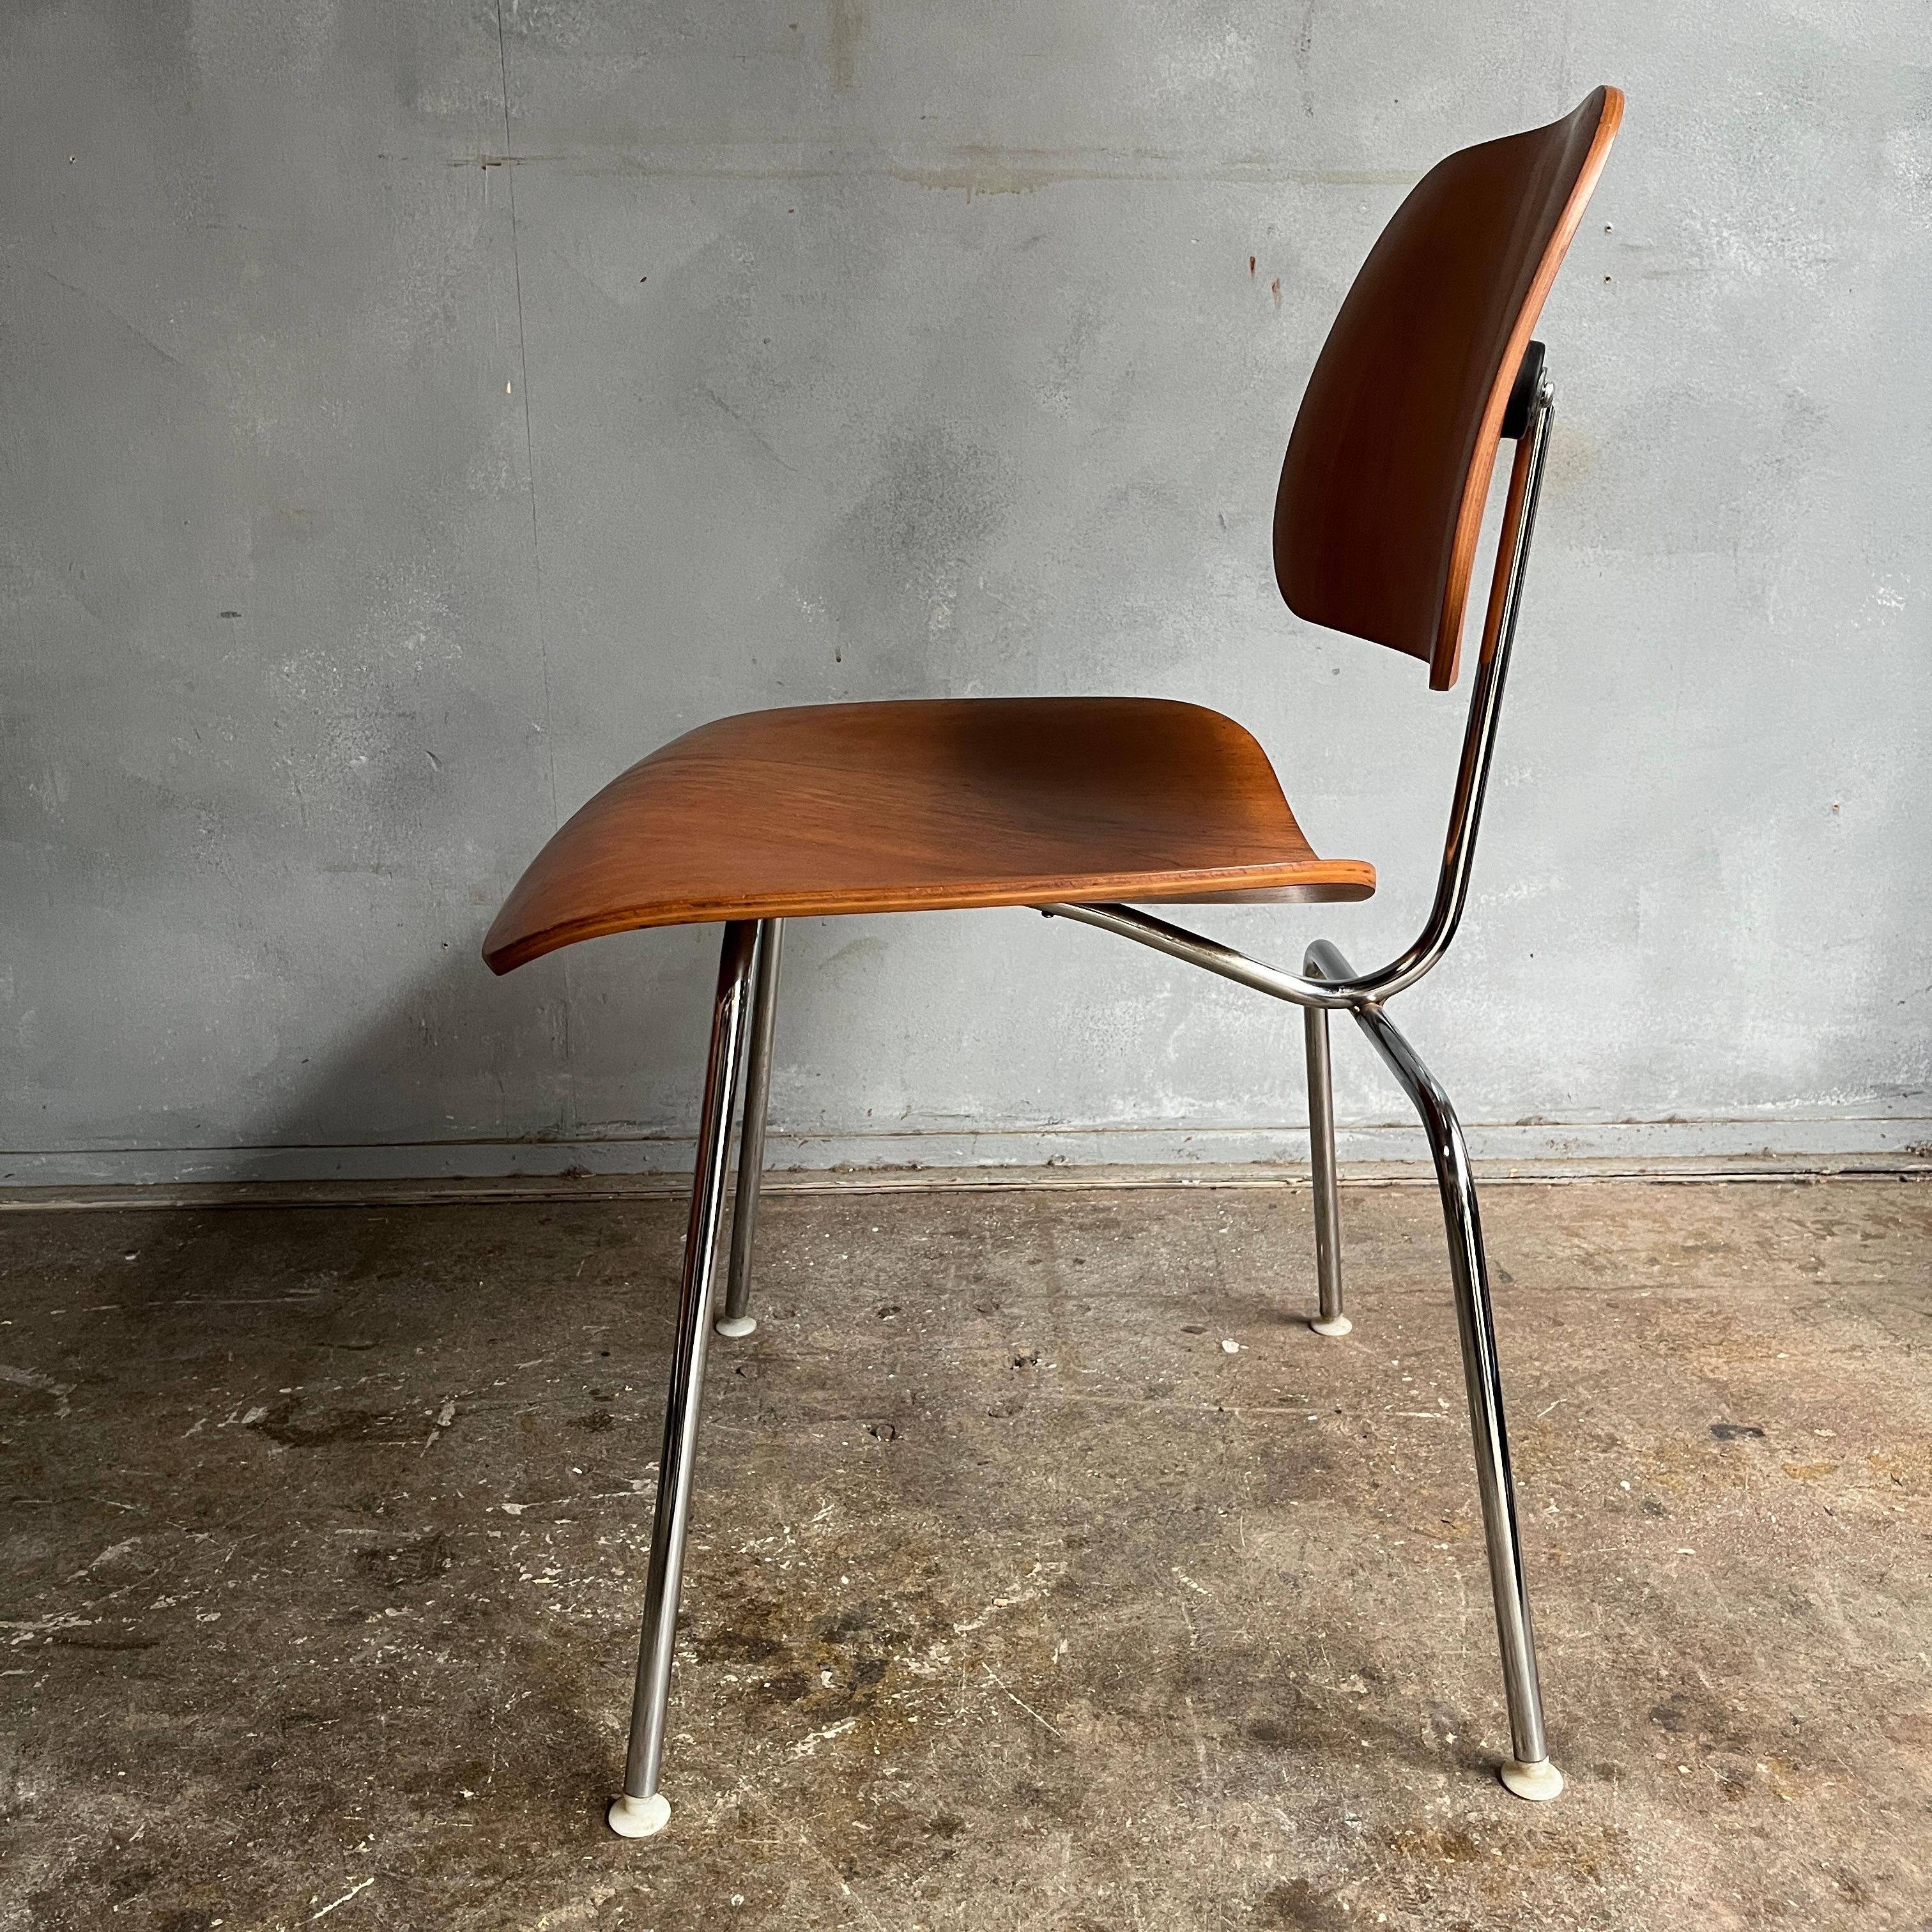 Bent plywood chairs produced by Herman Miller and designed by Charles and Ray Eames. This chair is in great vintage condition, shows better than expected with little signs of use. Of course some beautiful age and patina shows and to be expected.